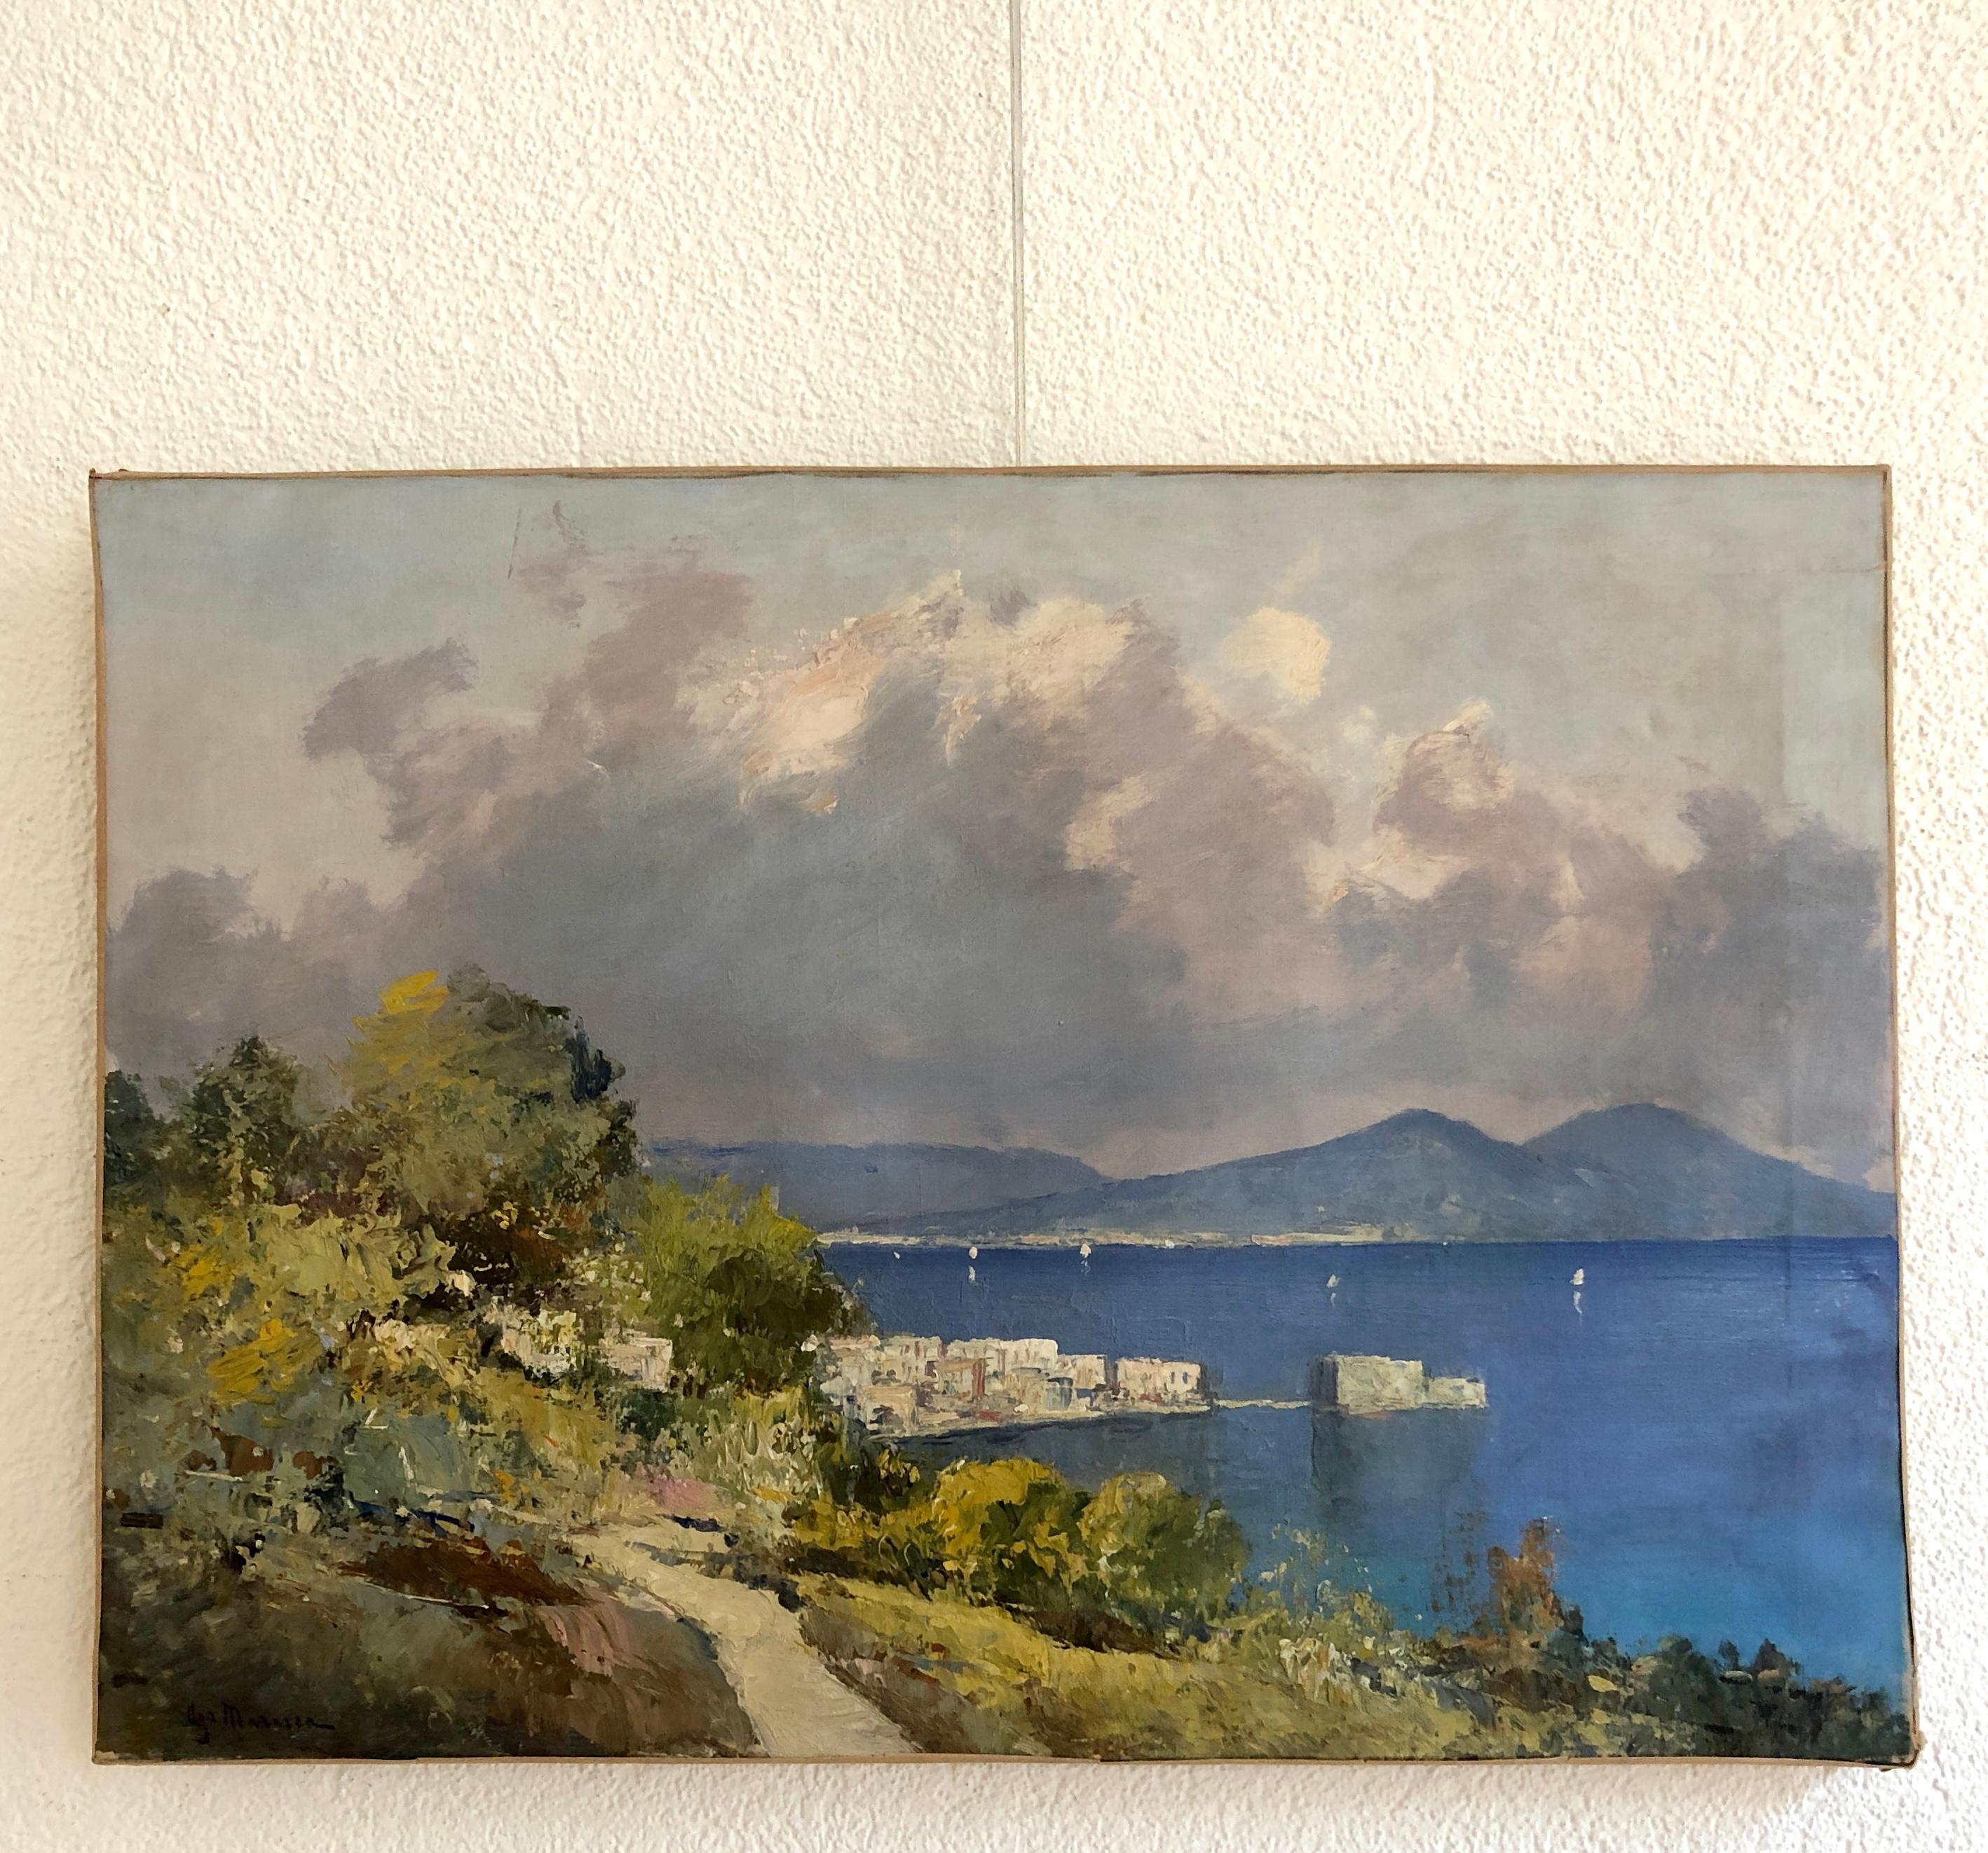 Bay of Naples and view of Vesuvius - Painting by Ugo Maresca